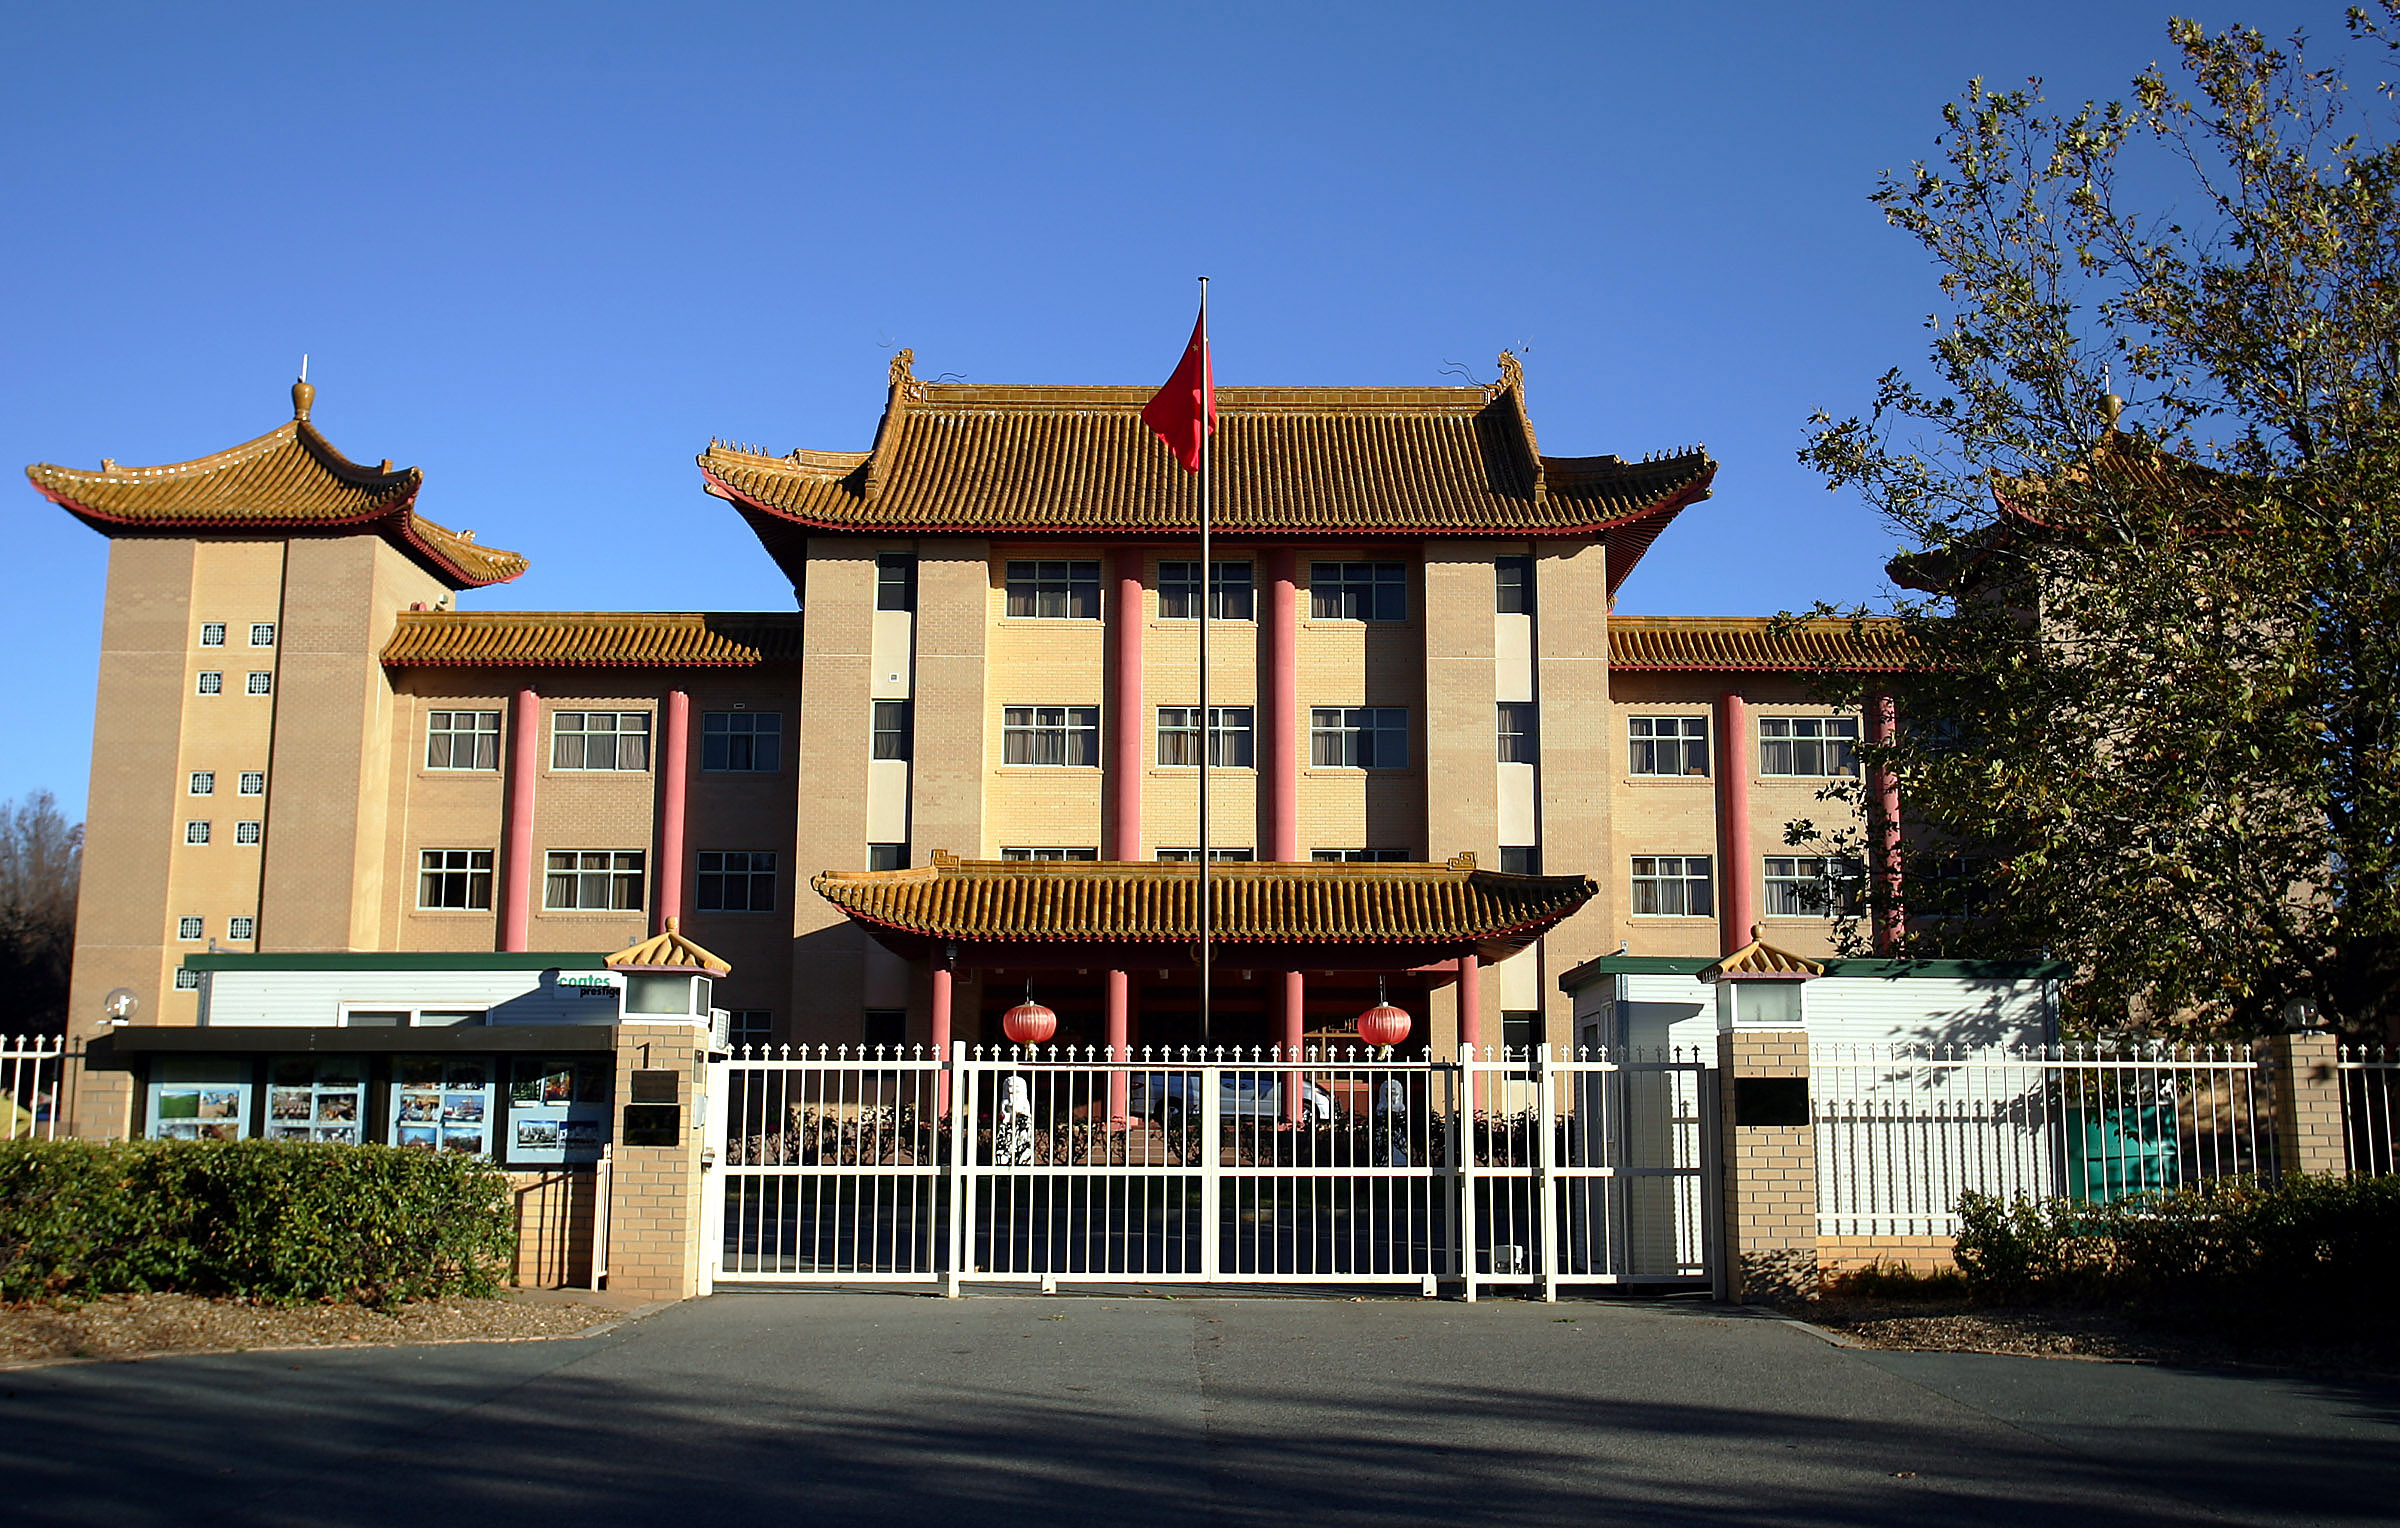 File picture of a street view of the front of the Chinese Embassy in Canberra.